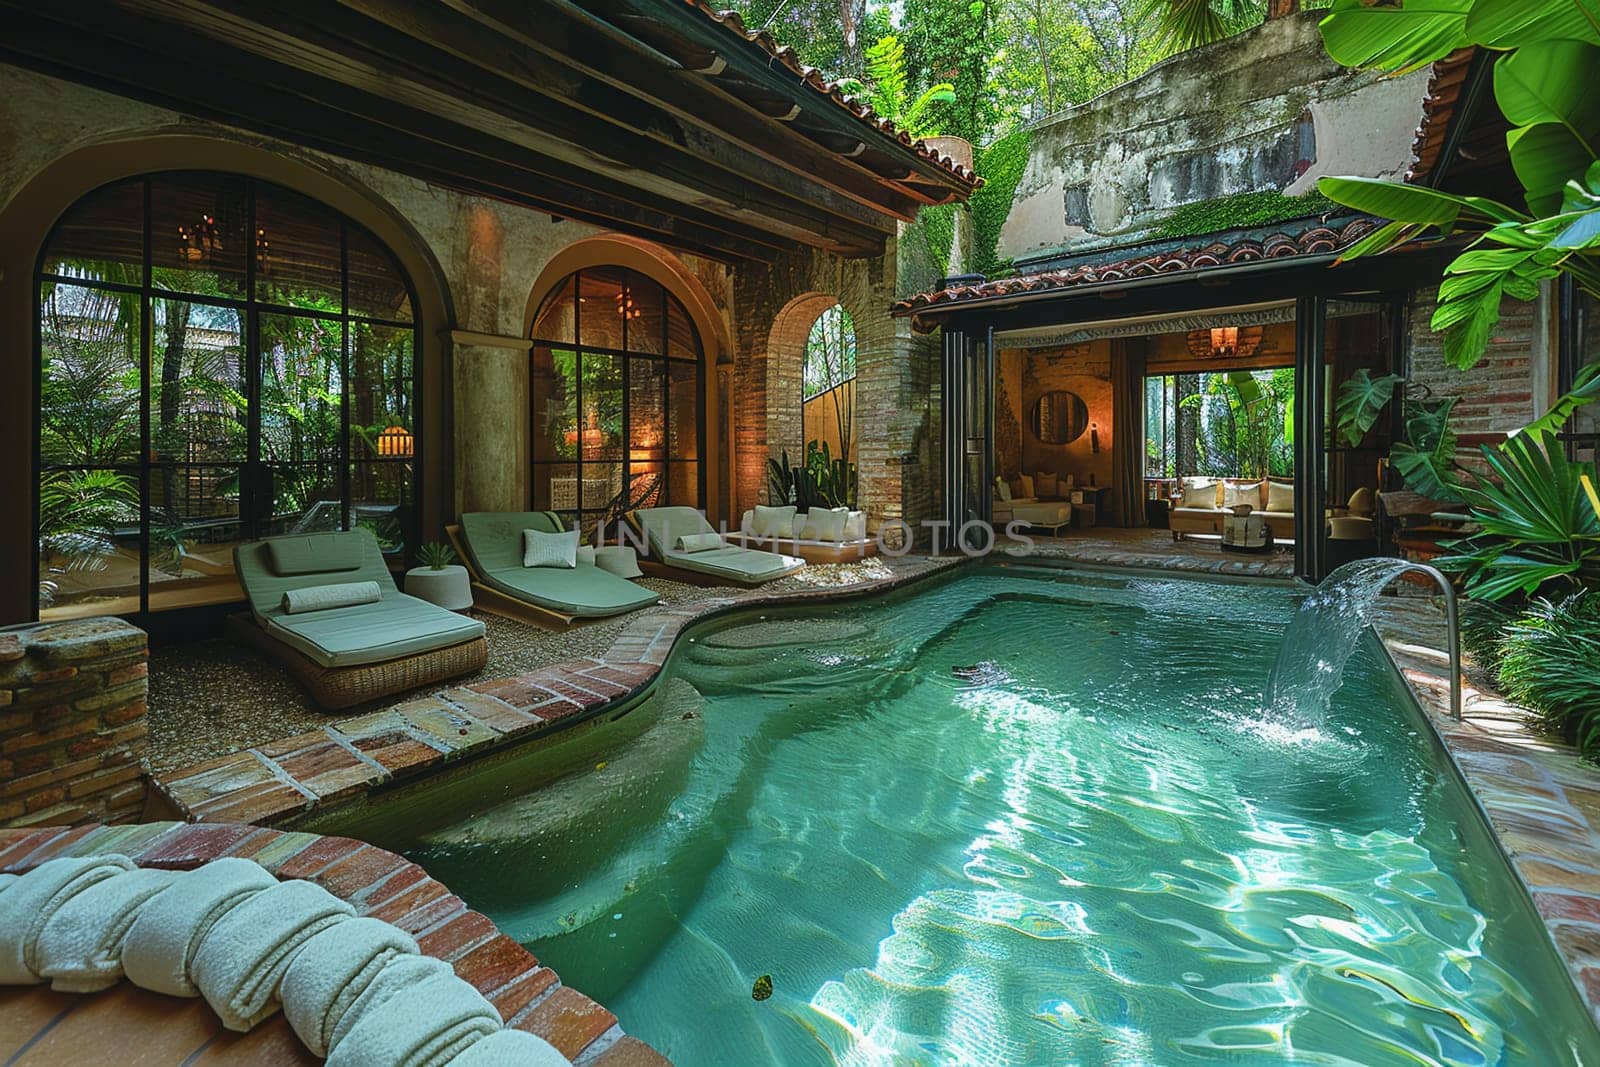 Luxurious spa with a serene pool area and relaxation lounges